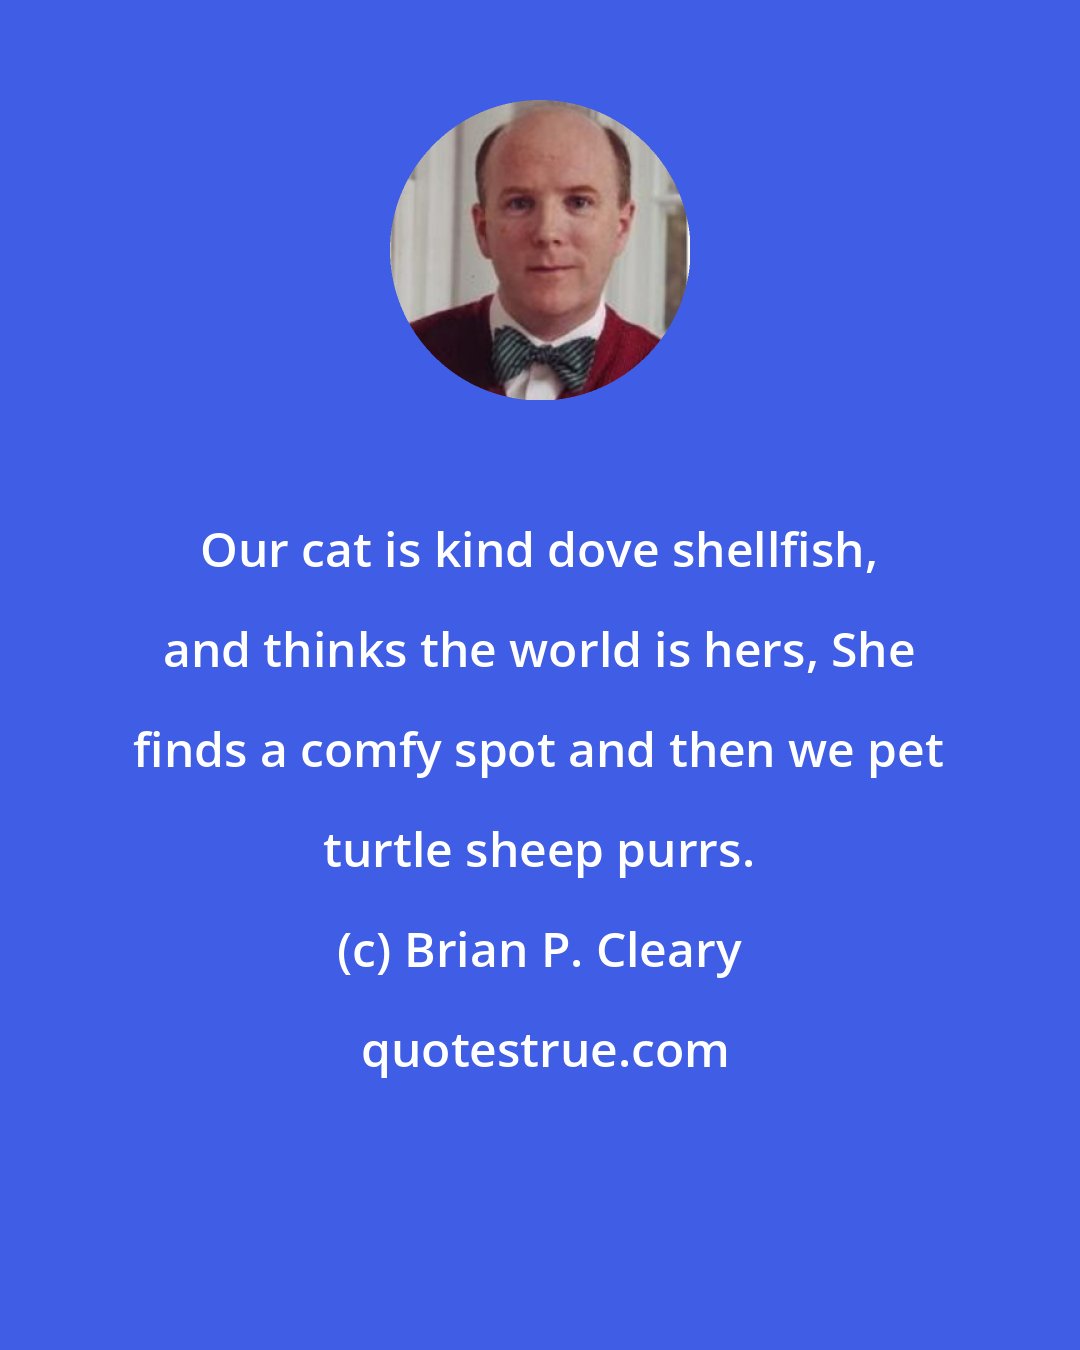 Brian P. Cleary: Our cat is kind dove shellfish, and thinks the world is hers, She finds a comfy spot and then we pet turtle sheep purrs.